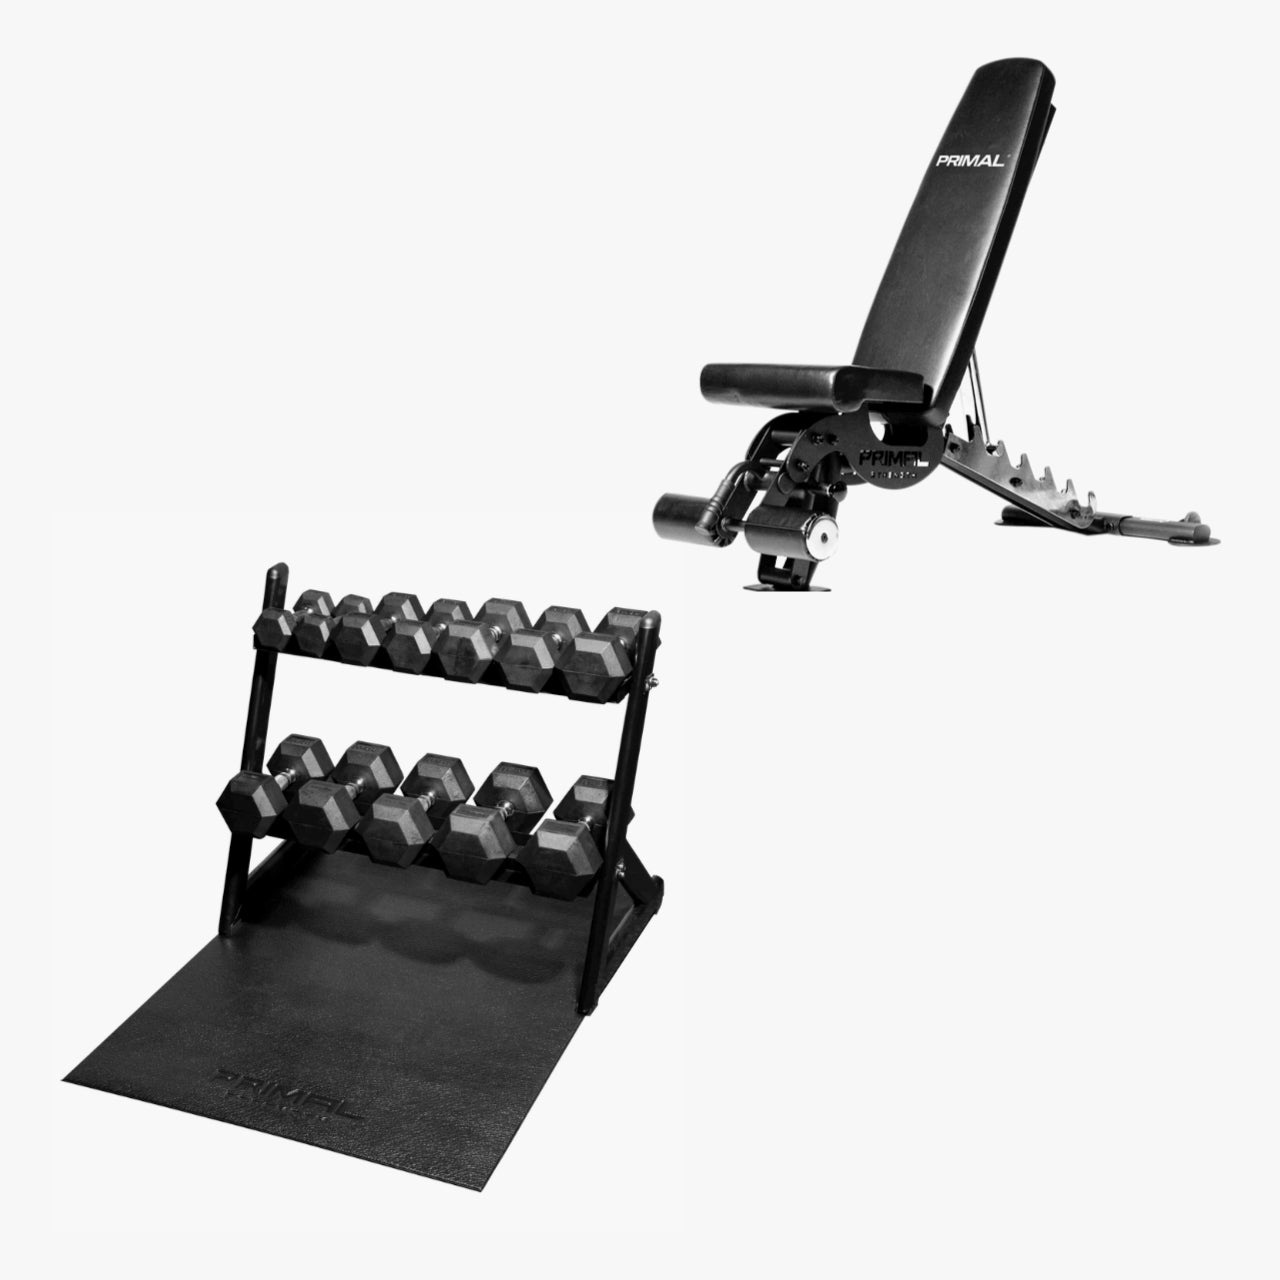 Primal Pro Series Multi Adjustable Bench With Foot Support & Hex Dumbbell Set